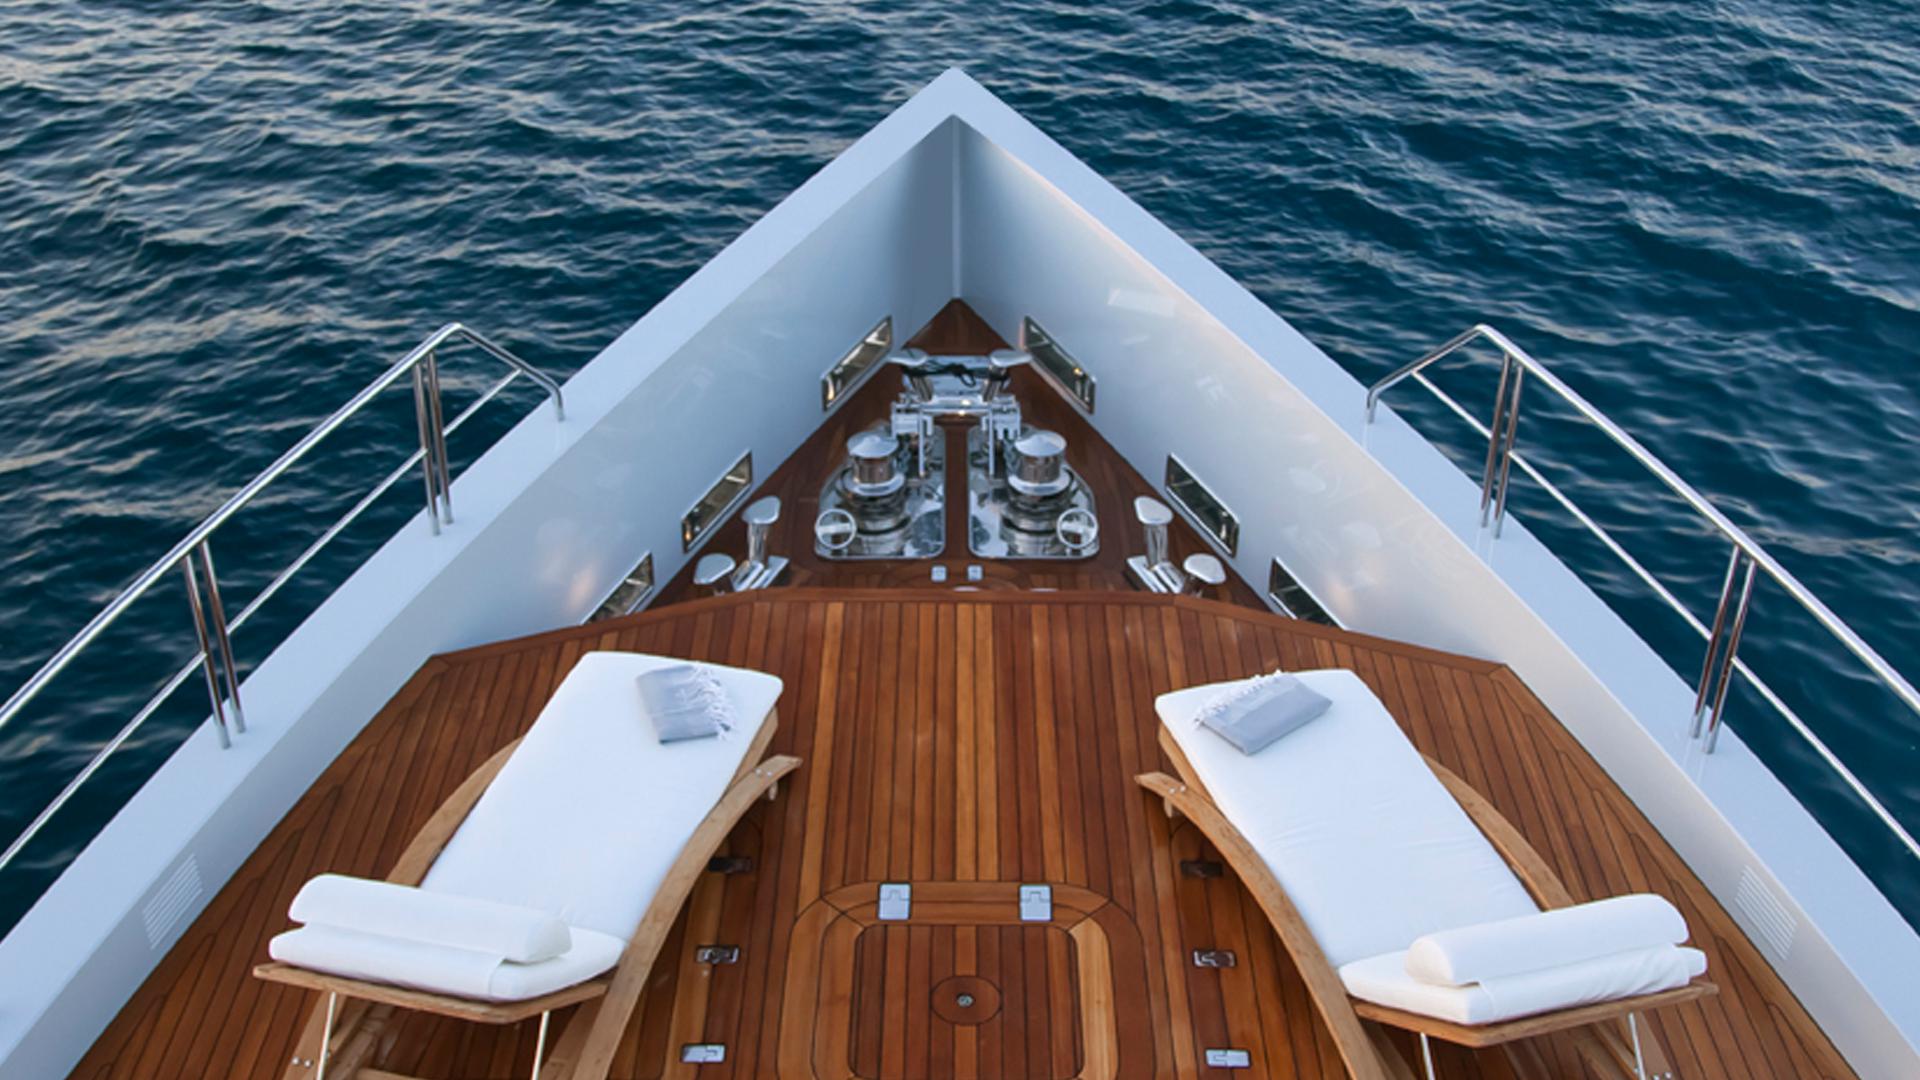 Motor Yacht Preference - bow, top view. Photo credit Tansu Yachts